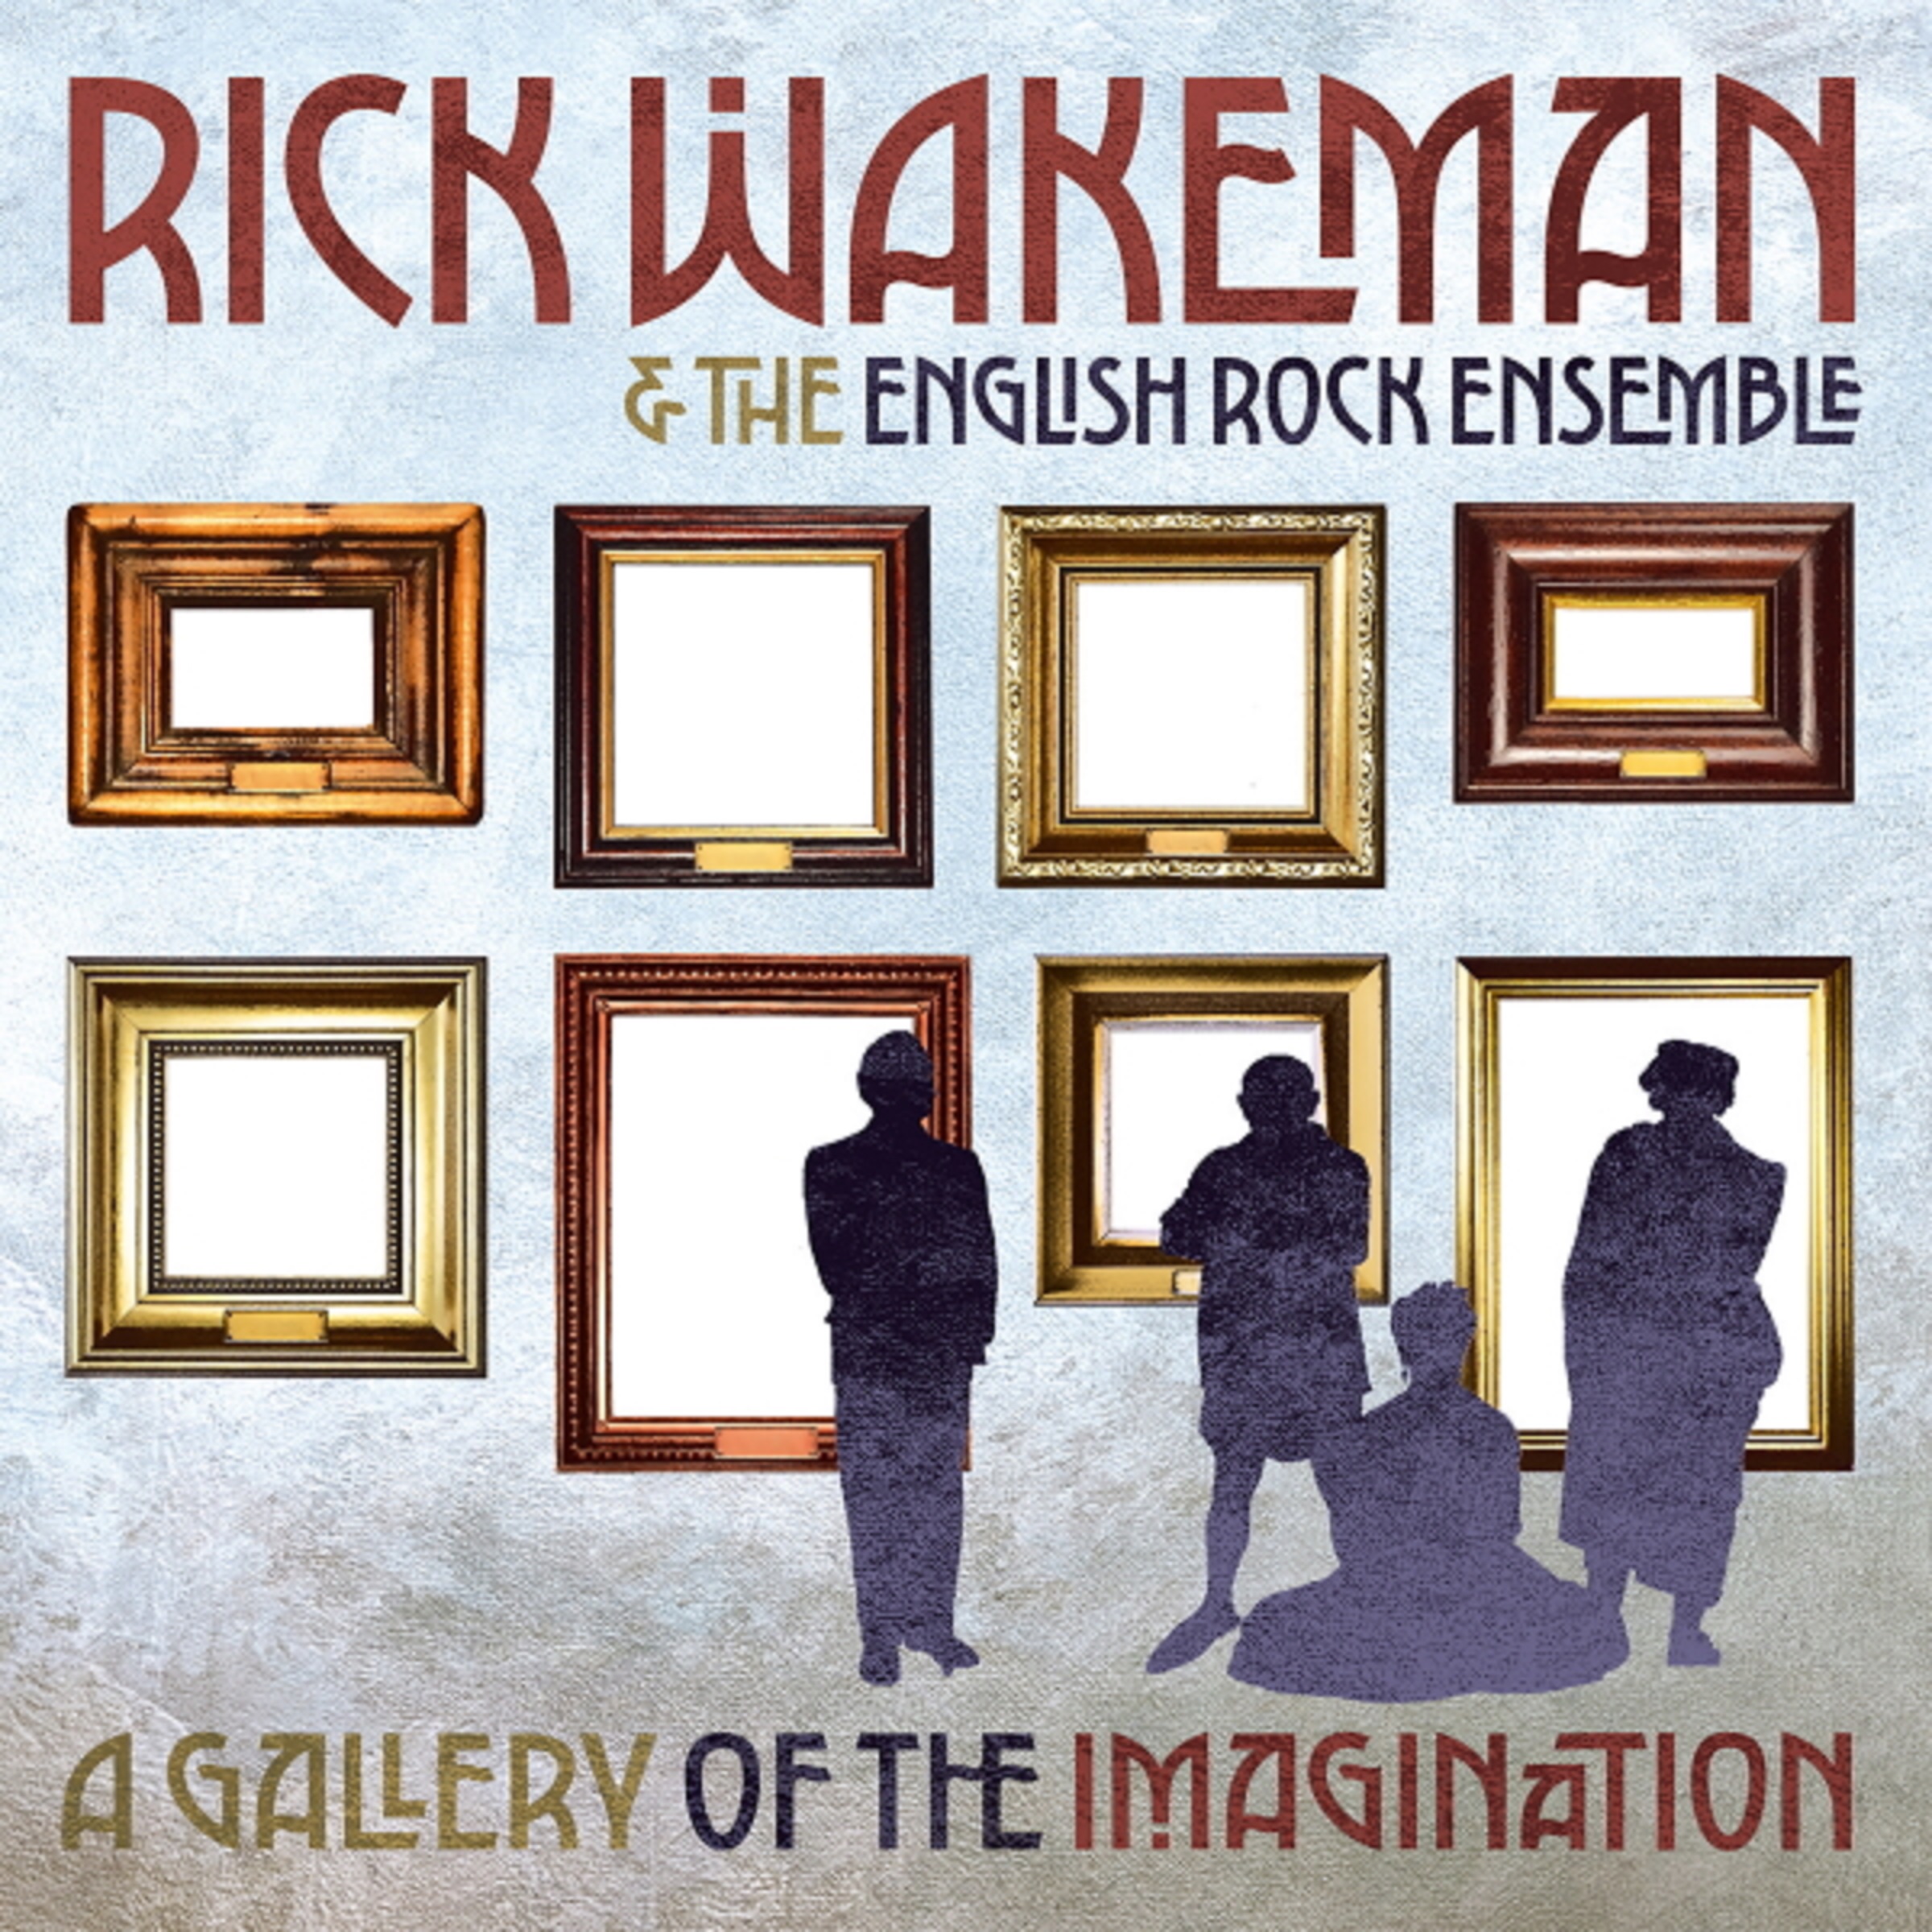 Keyboard Legend Rick Wakeman To Release New Concept Album “A Gallery Of The Imagination”